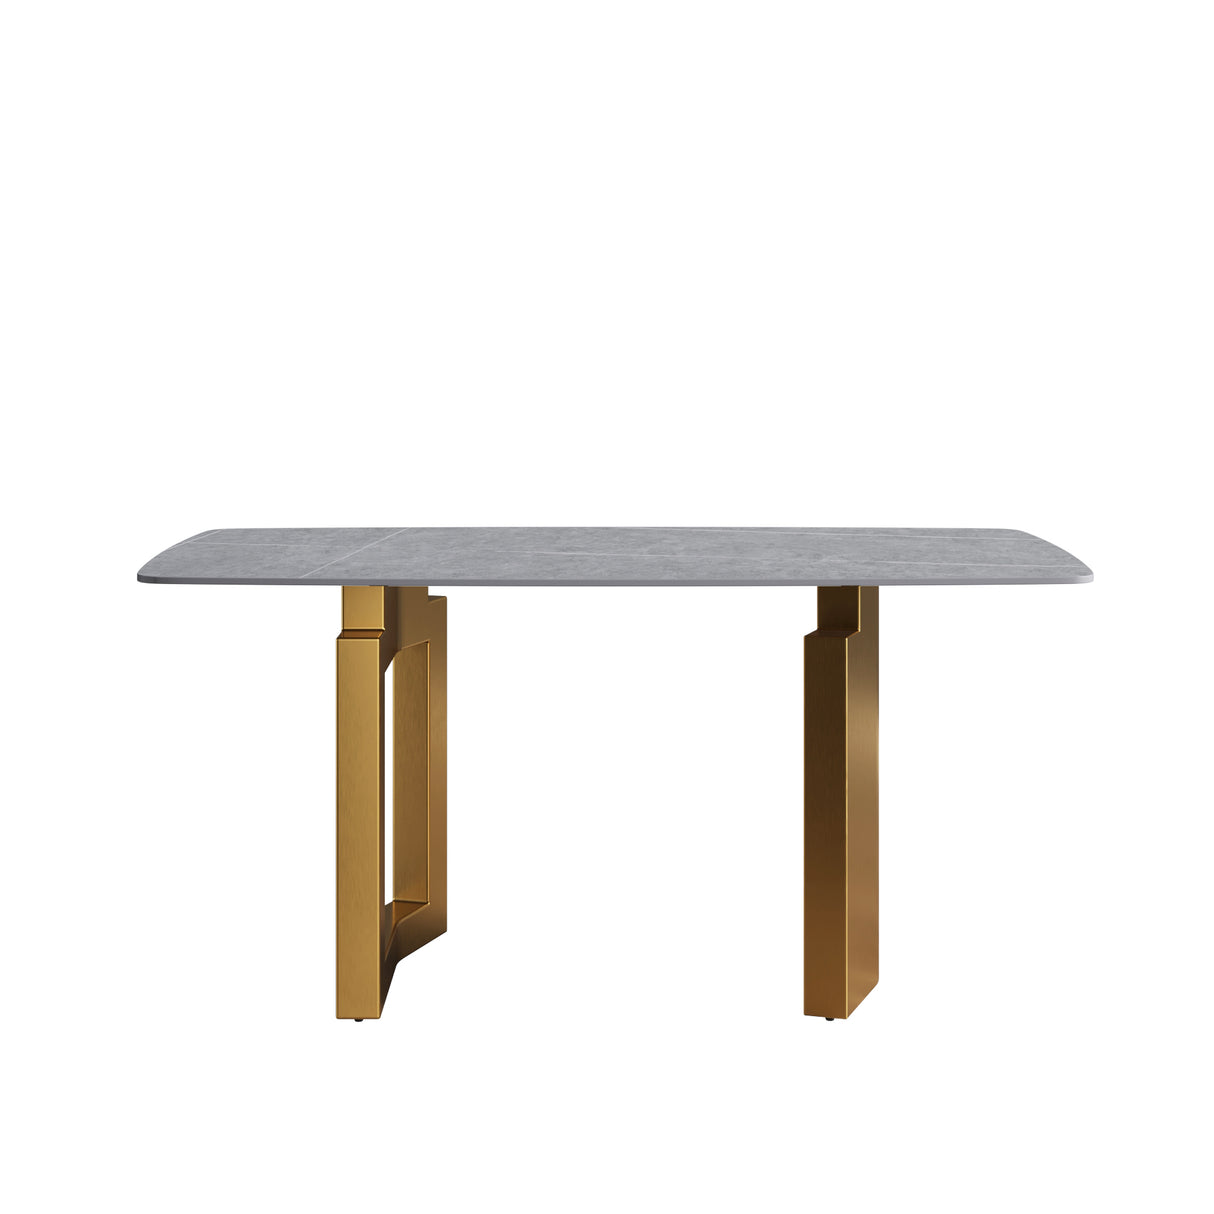 63"Modern artificial stone gray curved golden metal leg dining table -6 people - Home Elegance USA